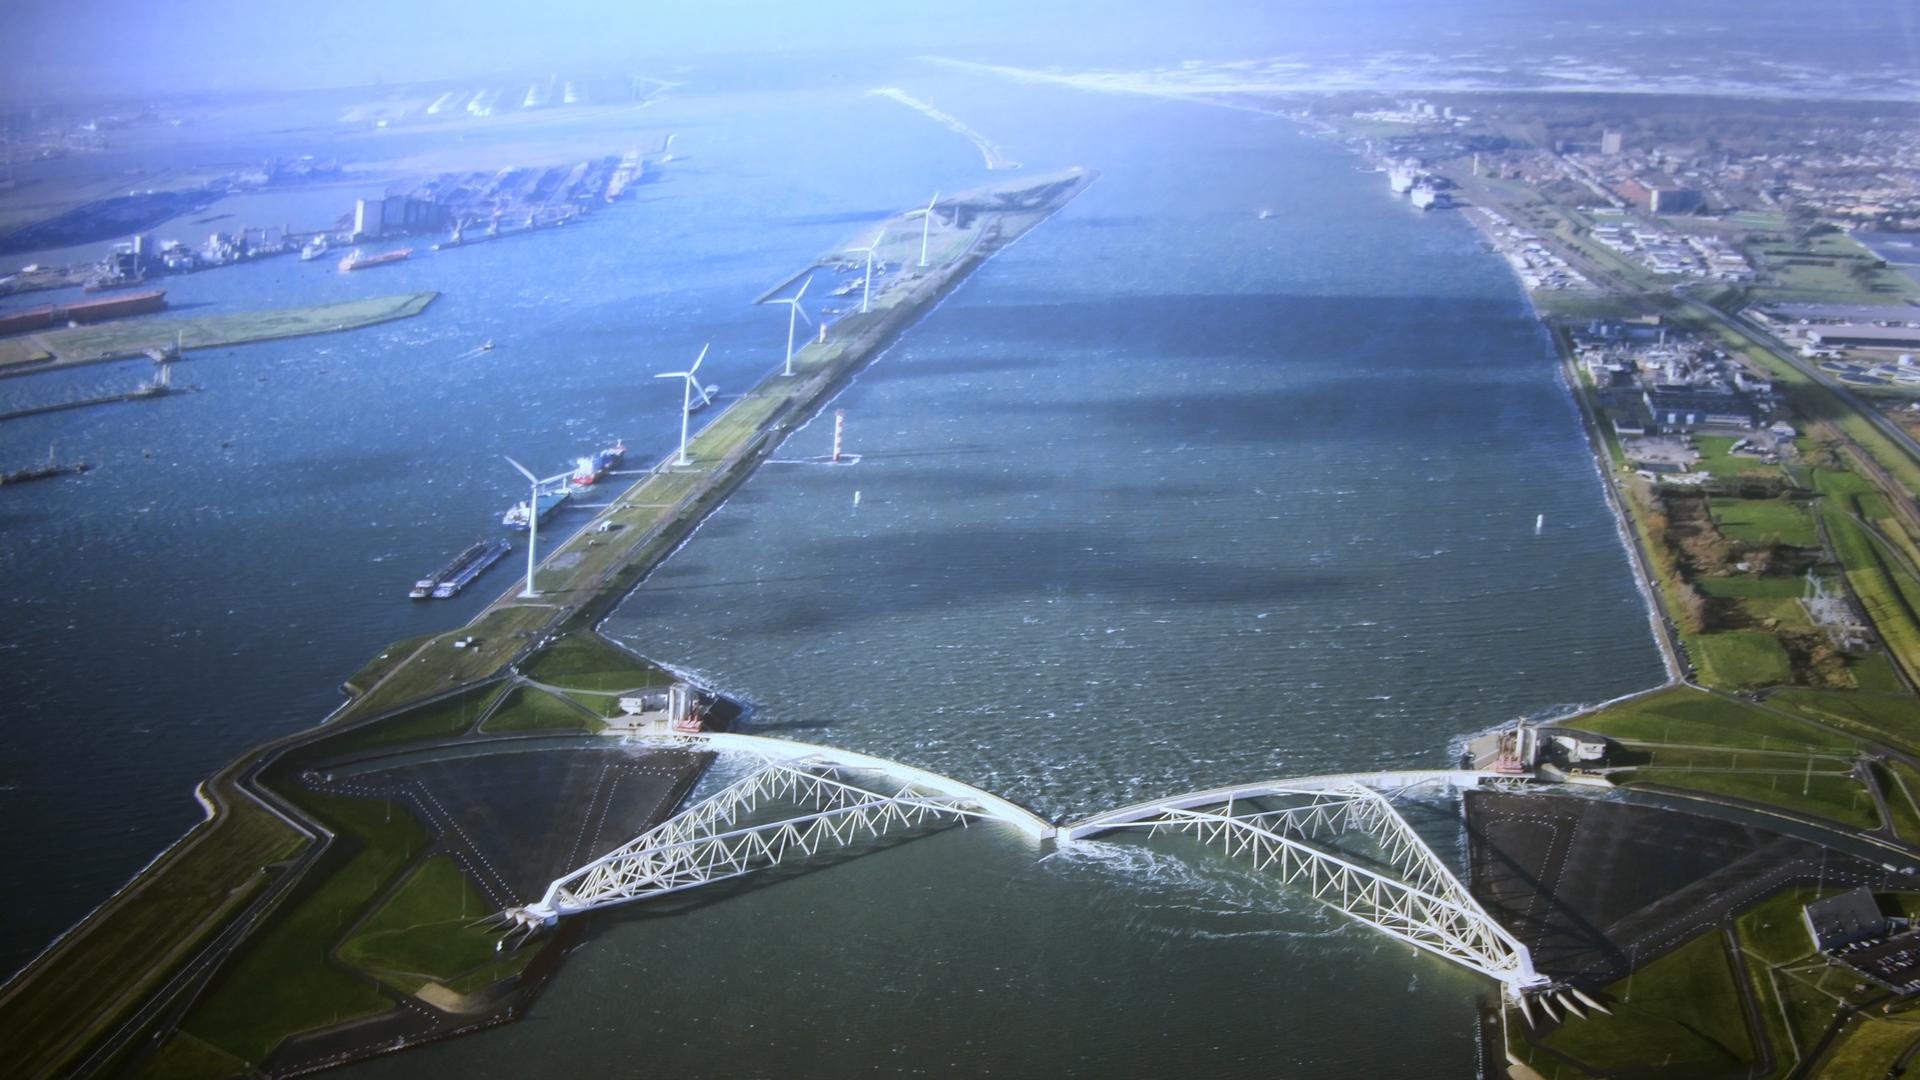 The biggest mobile barrier in the world, the Maeslant storm surge barrier was built to protect the Dutch city of Rotterdam from a one-in-10,000-year storm. It's part of the massive investment the Dutch are making to protect themselves in a new era of risi